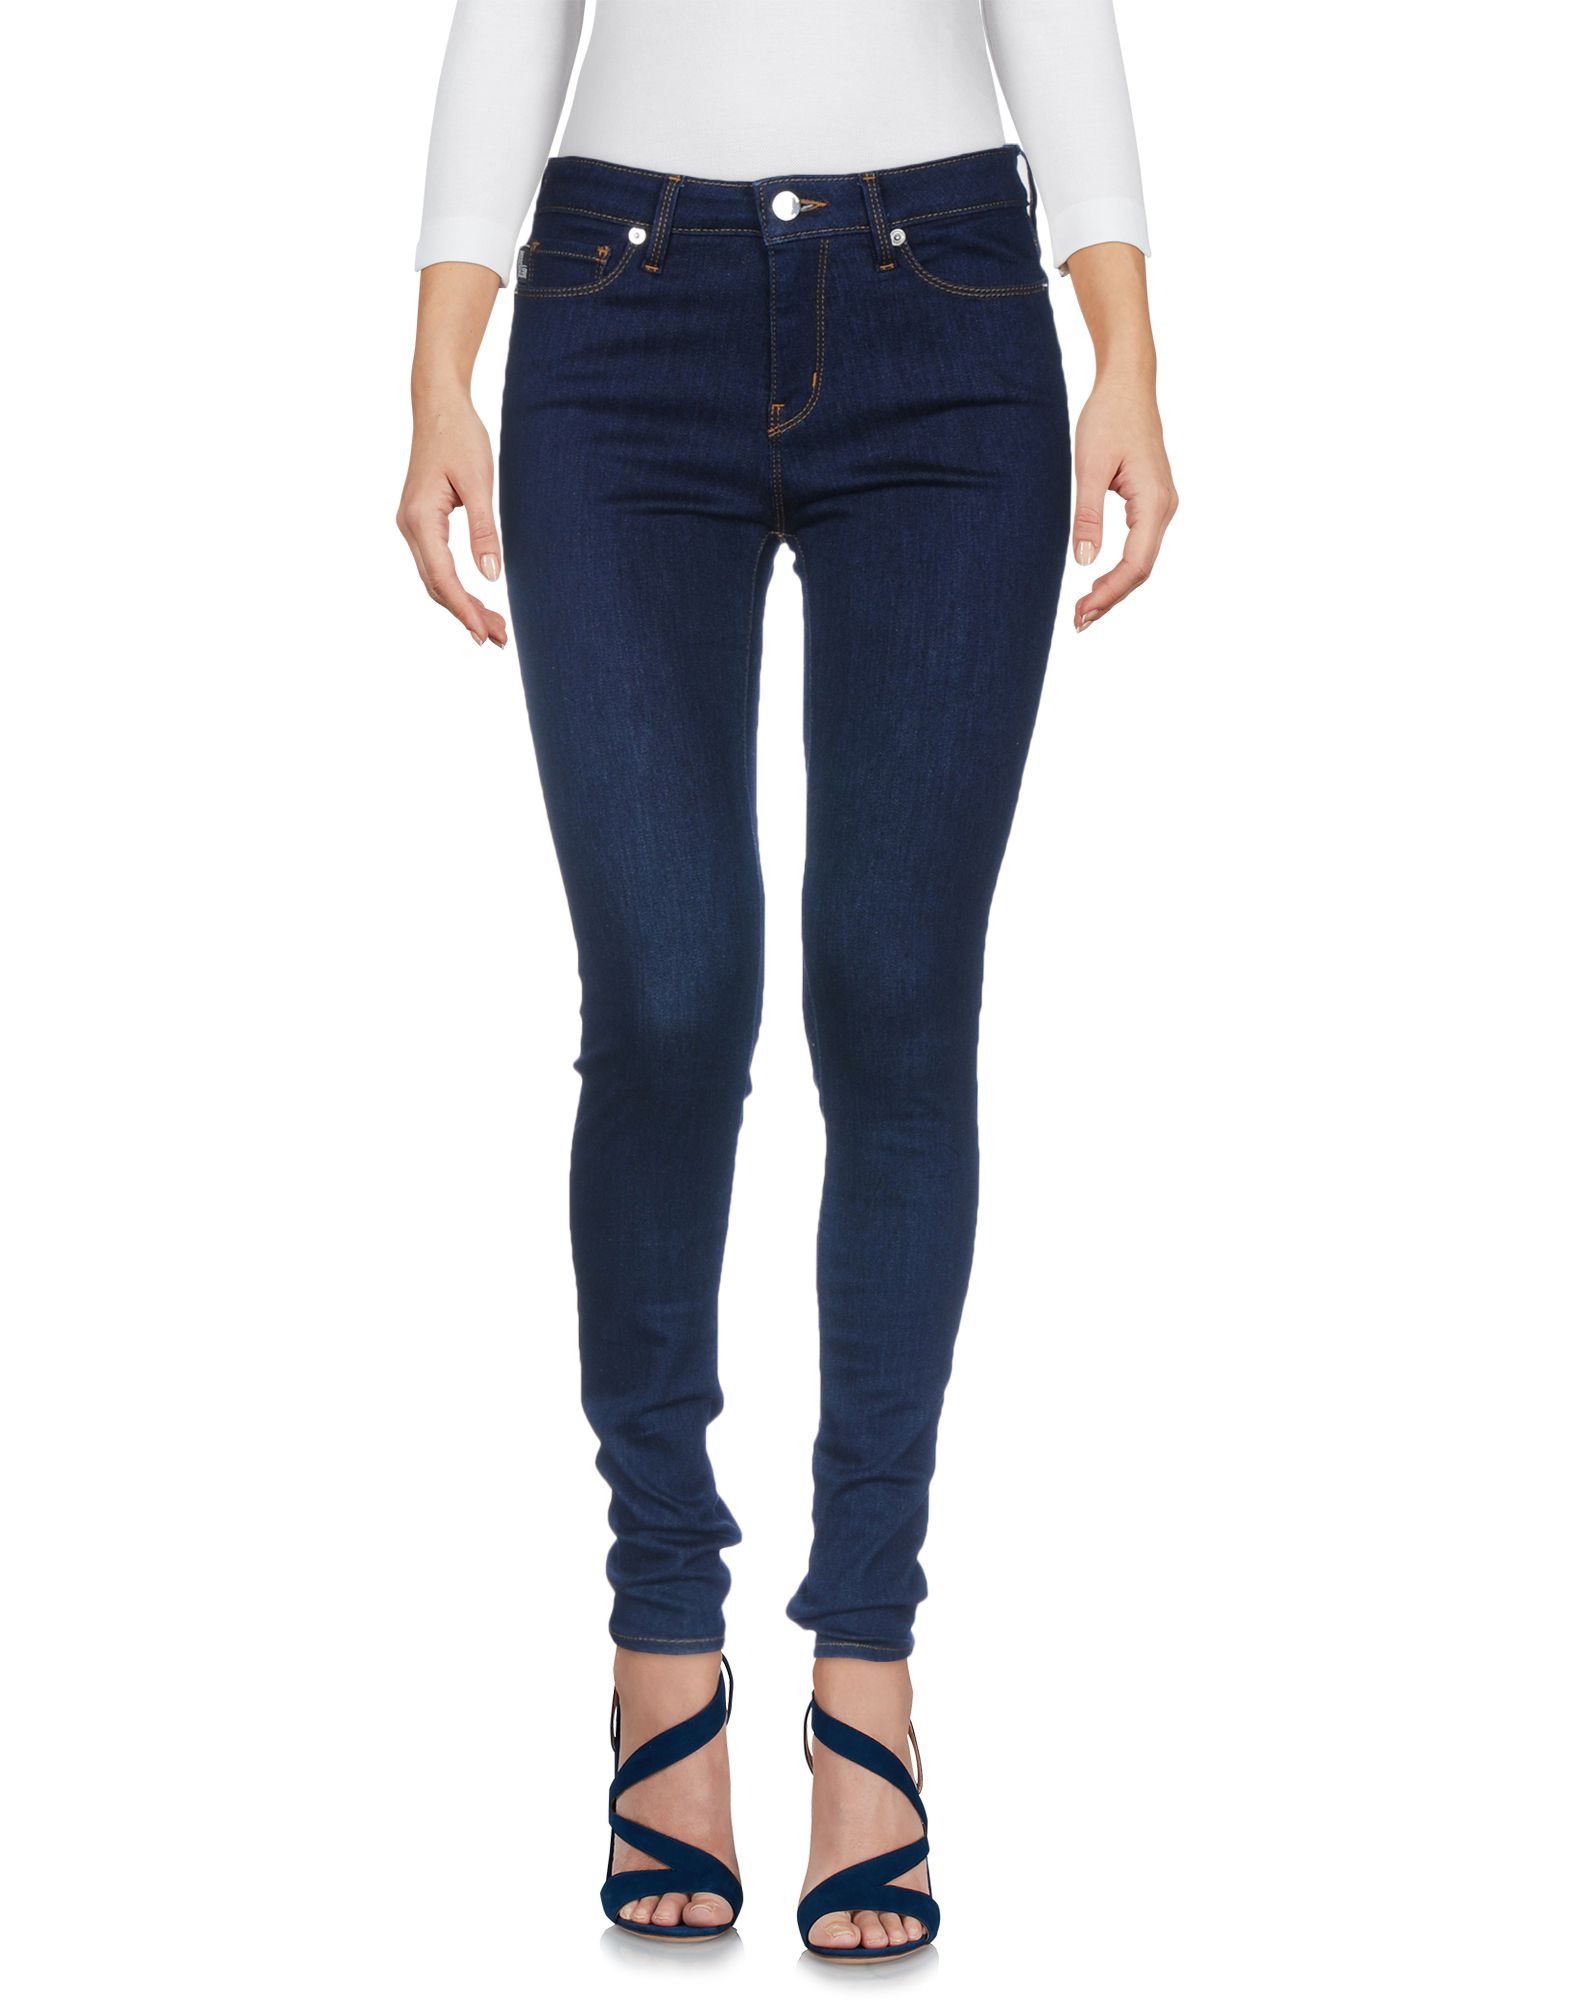 LOVE MOSCHINO JEANS,42666068MN 2